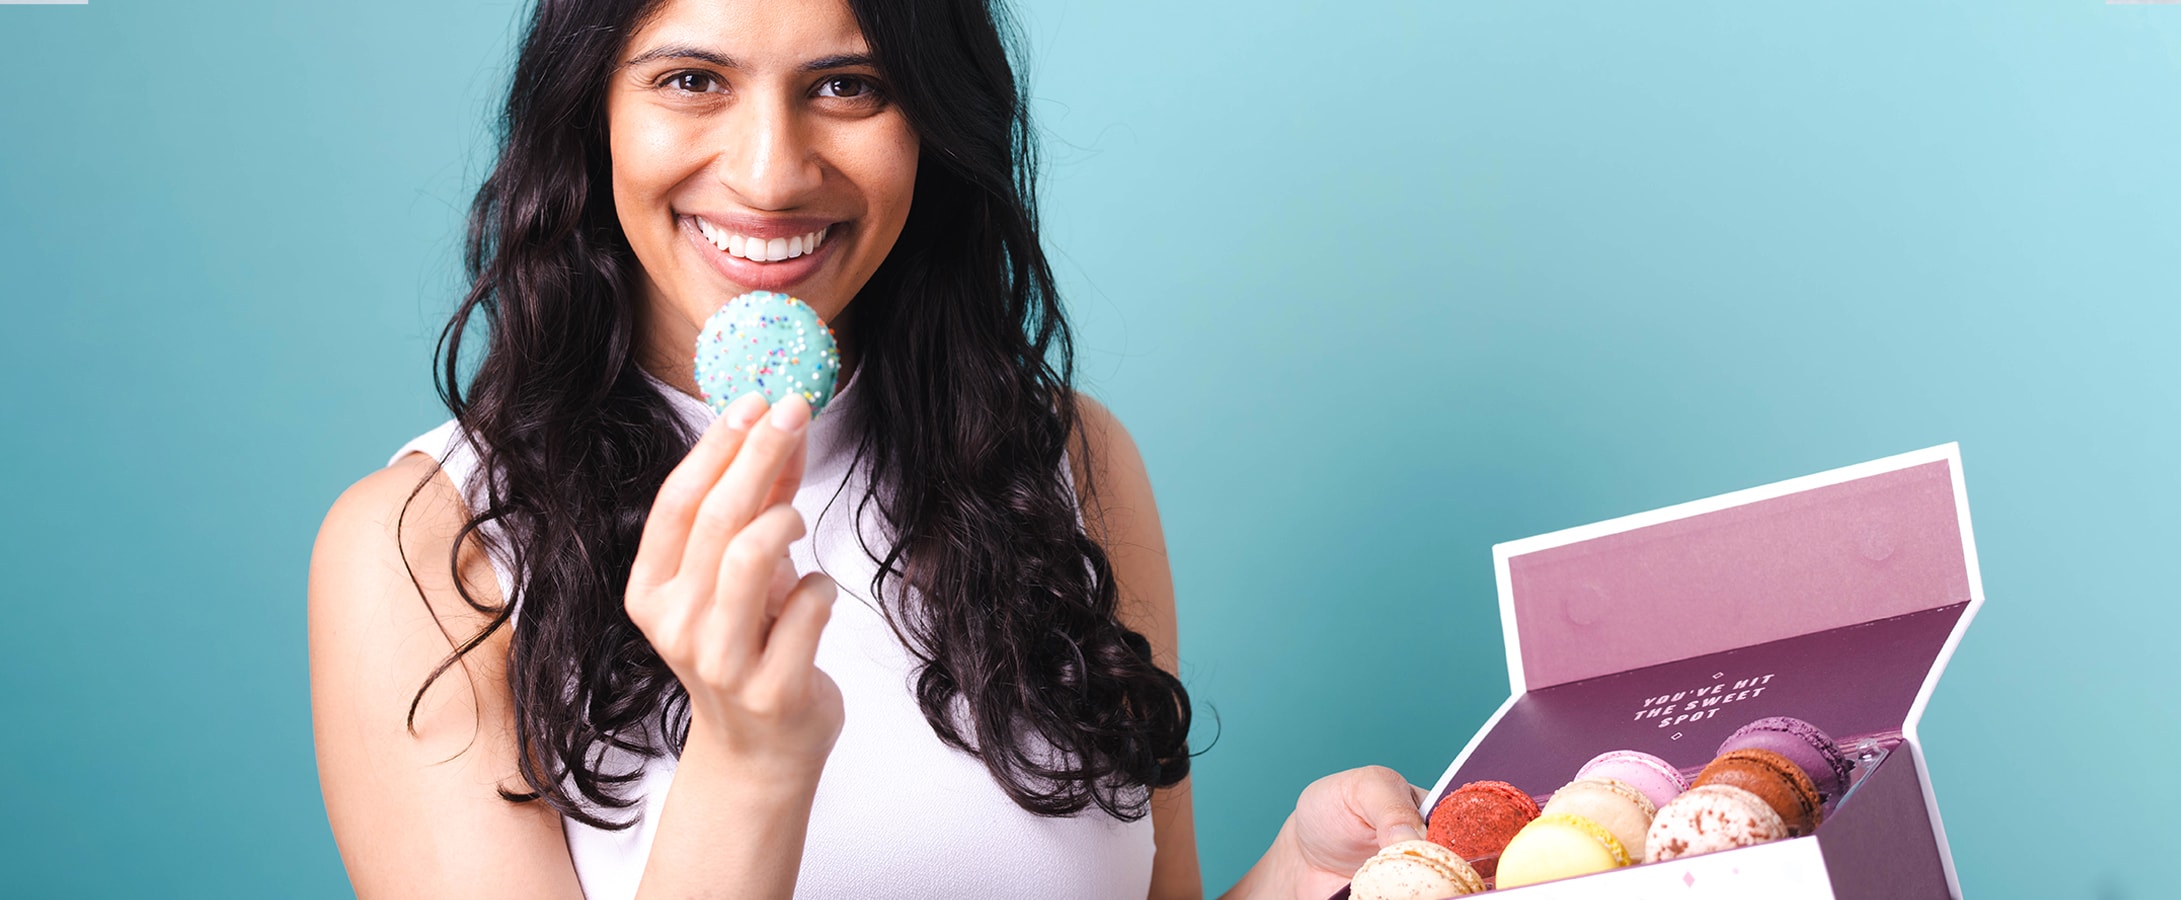 A smiling woman is holding a French macaron to her mouth and a box of macarons in the other.